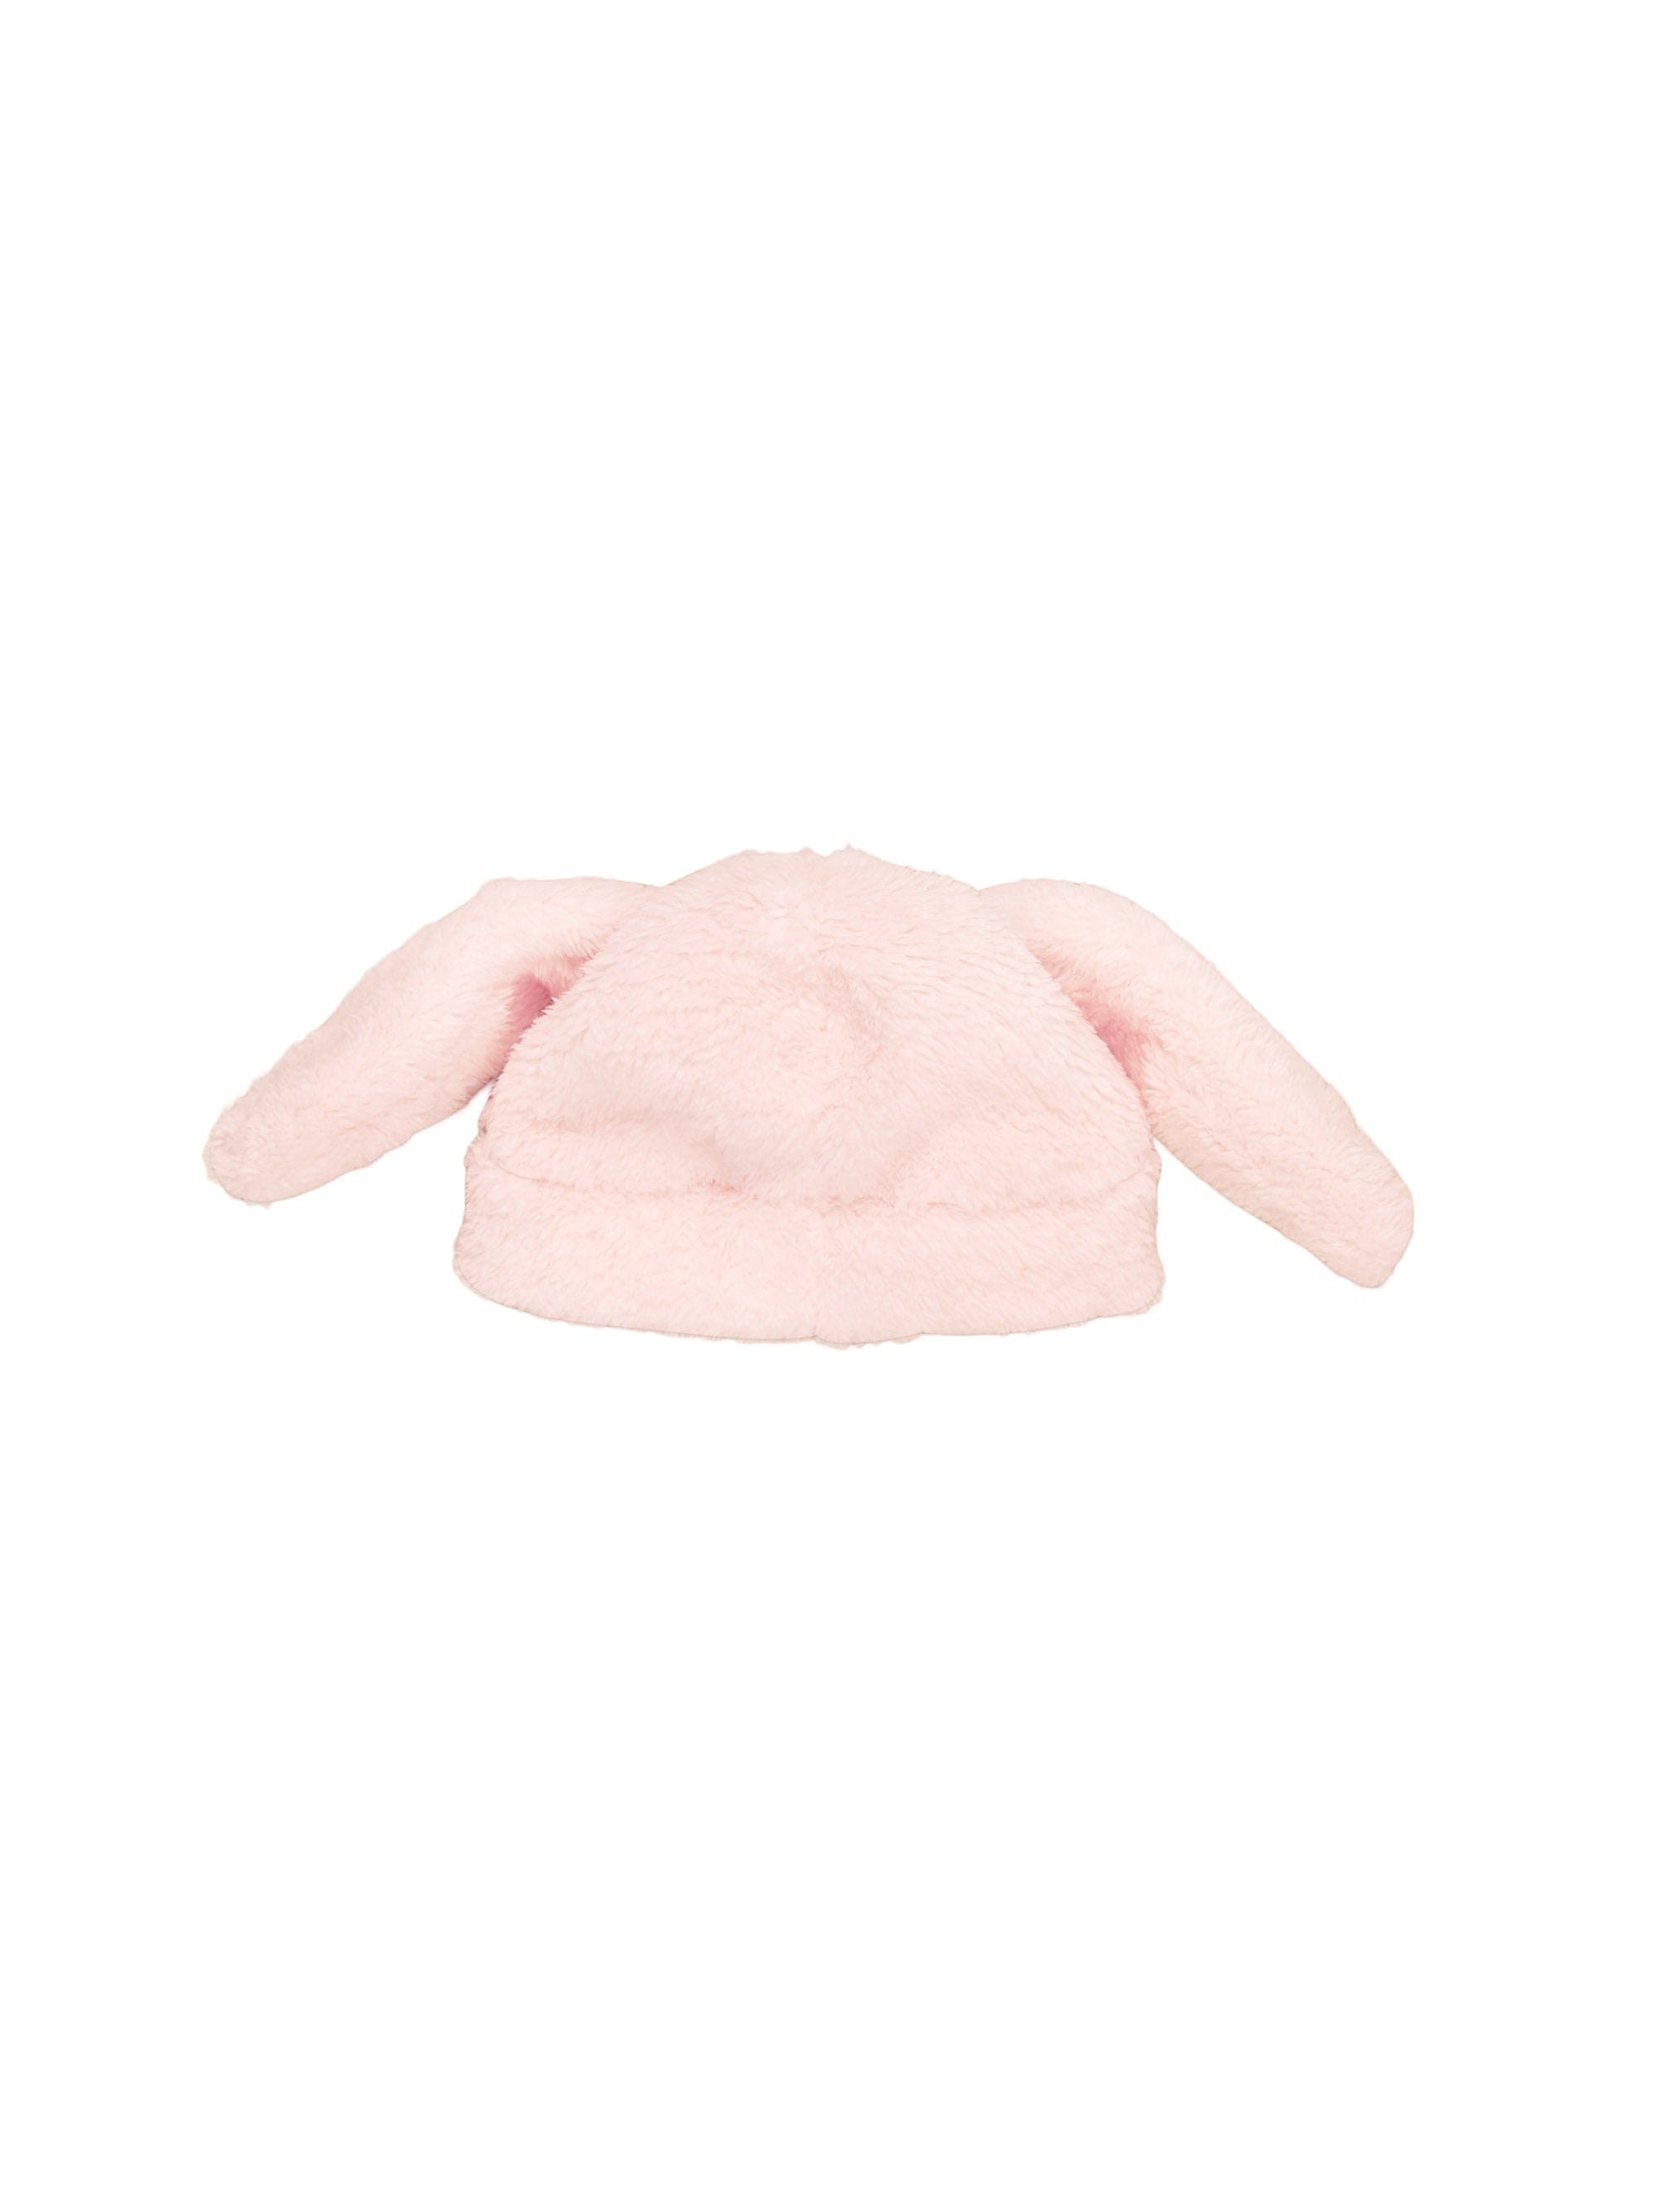 Huxbaby Accessories Hats Bunny Fur Beanie